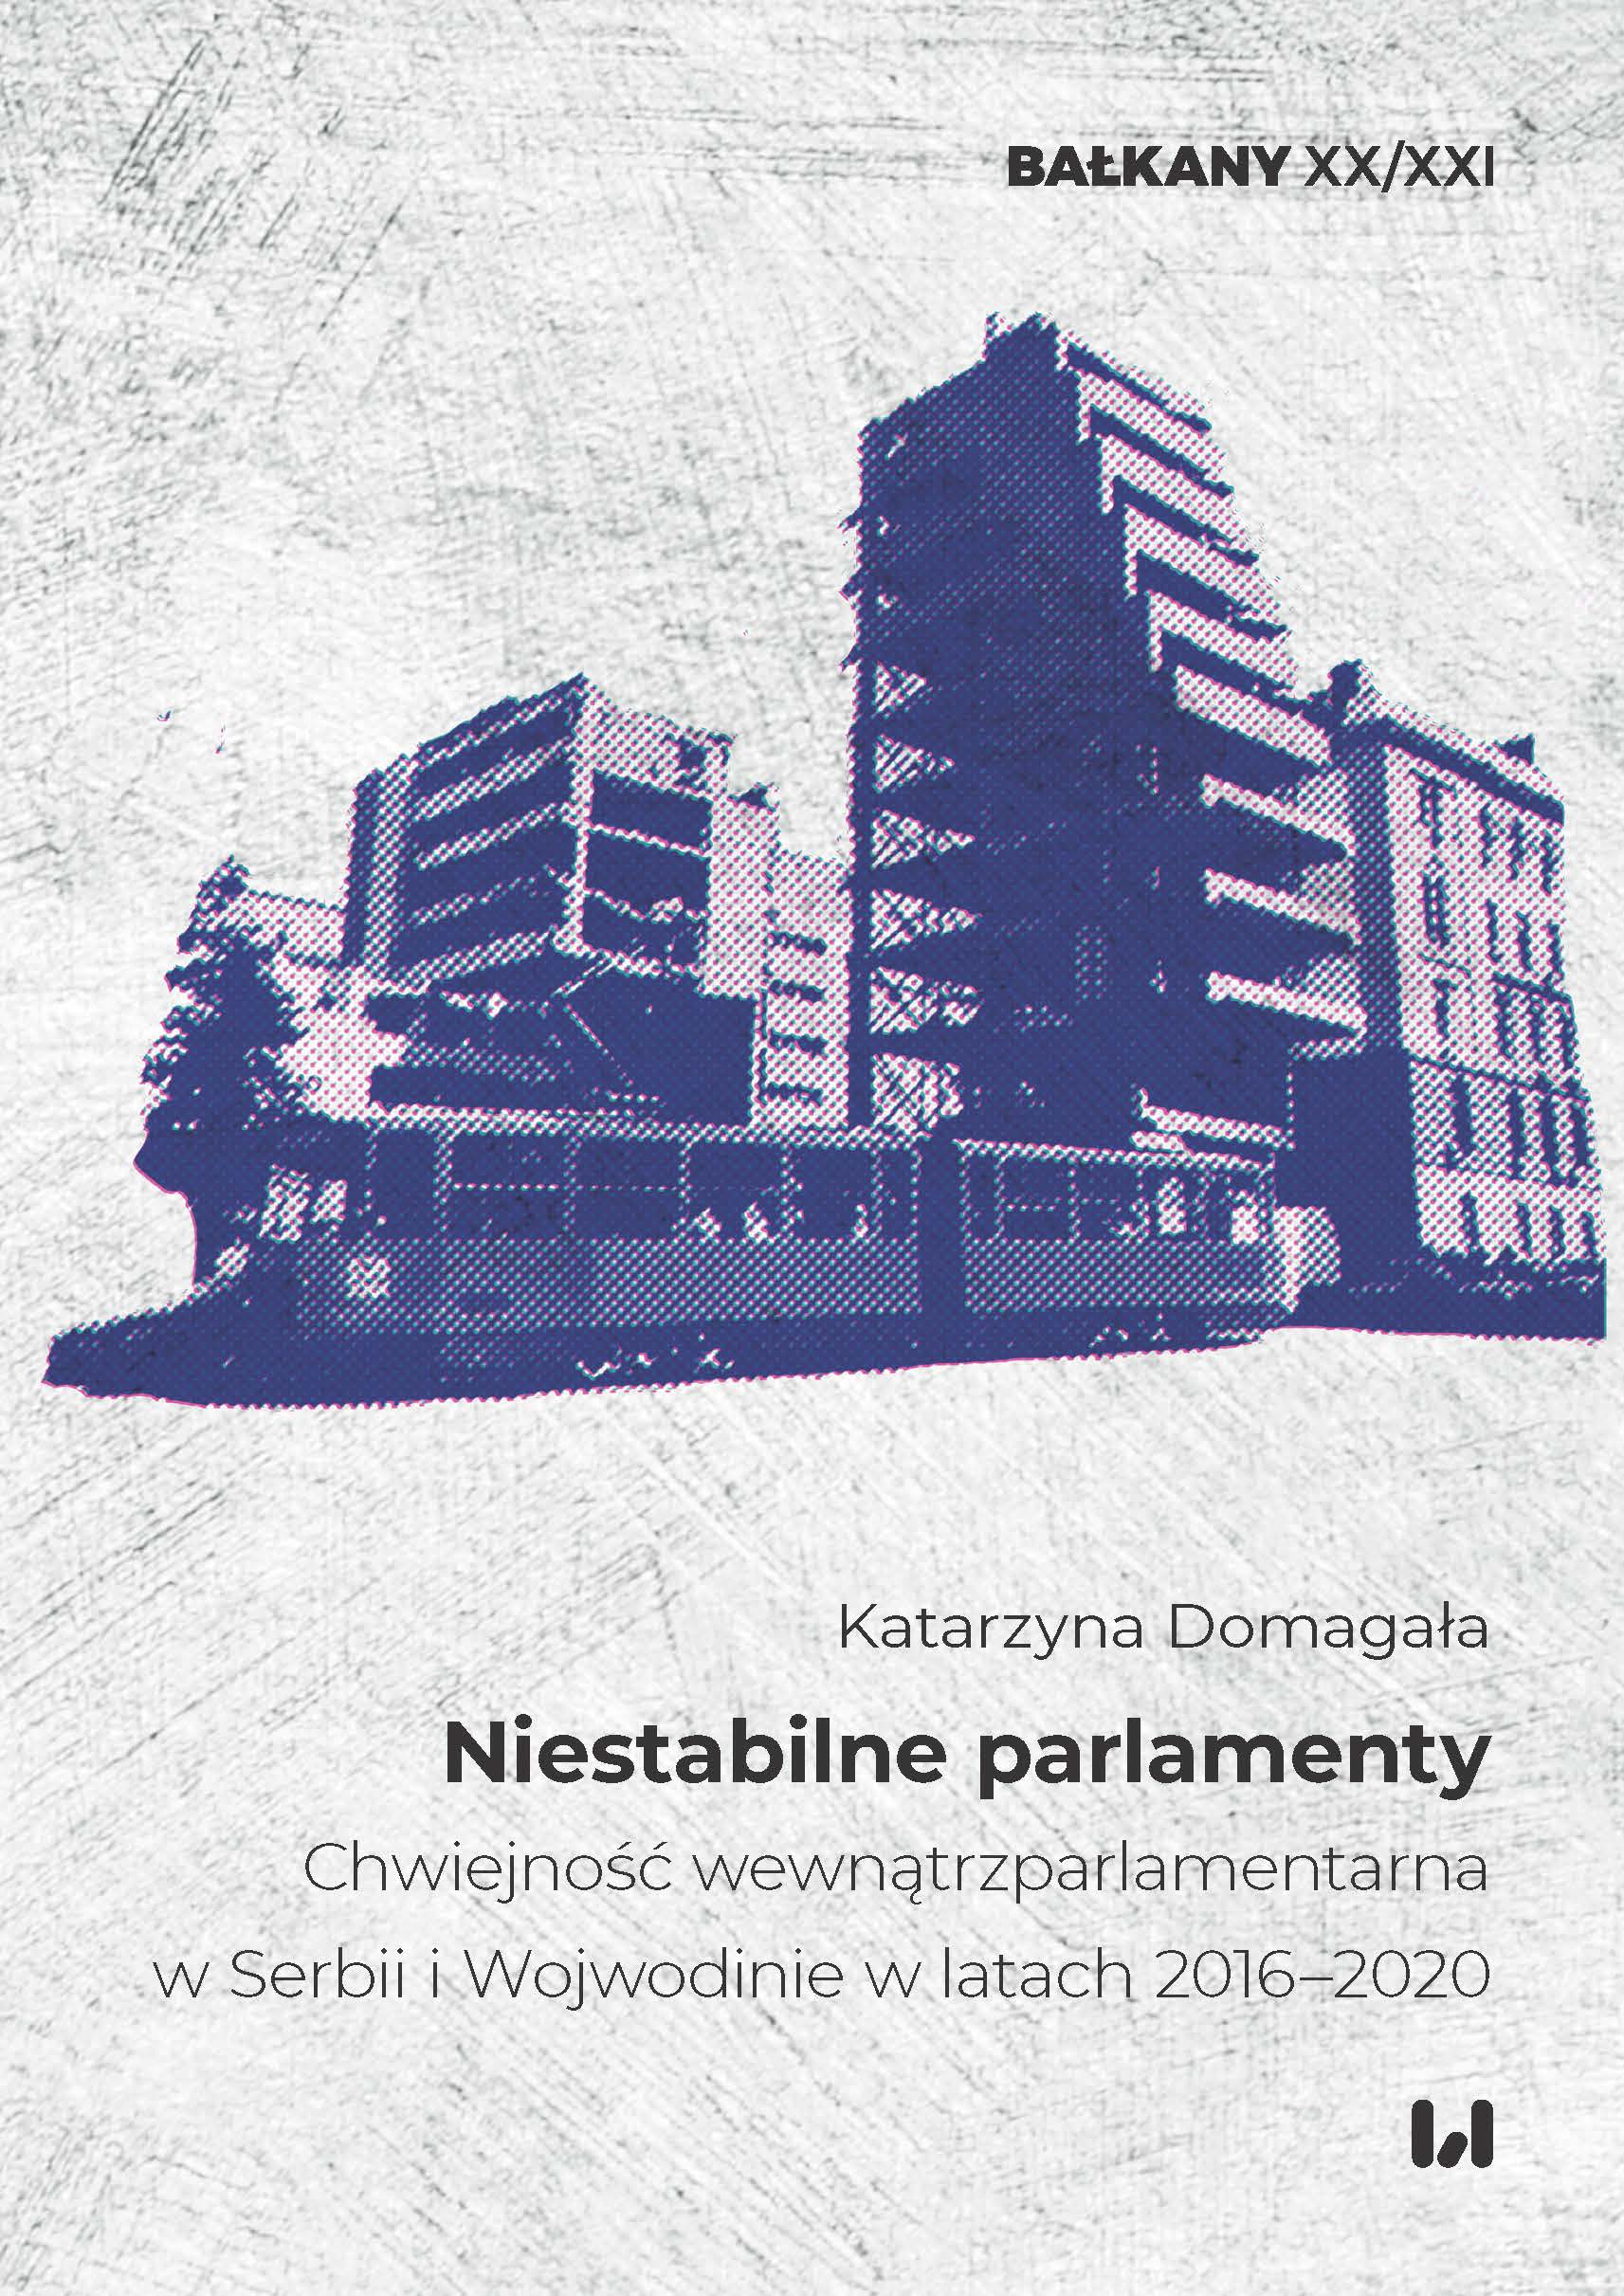 Unstable parliaments. Intraparliamentary volatility in Serbia and Vojvodina in 2016-2020